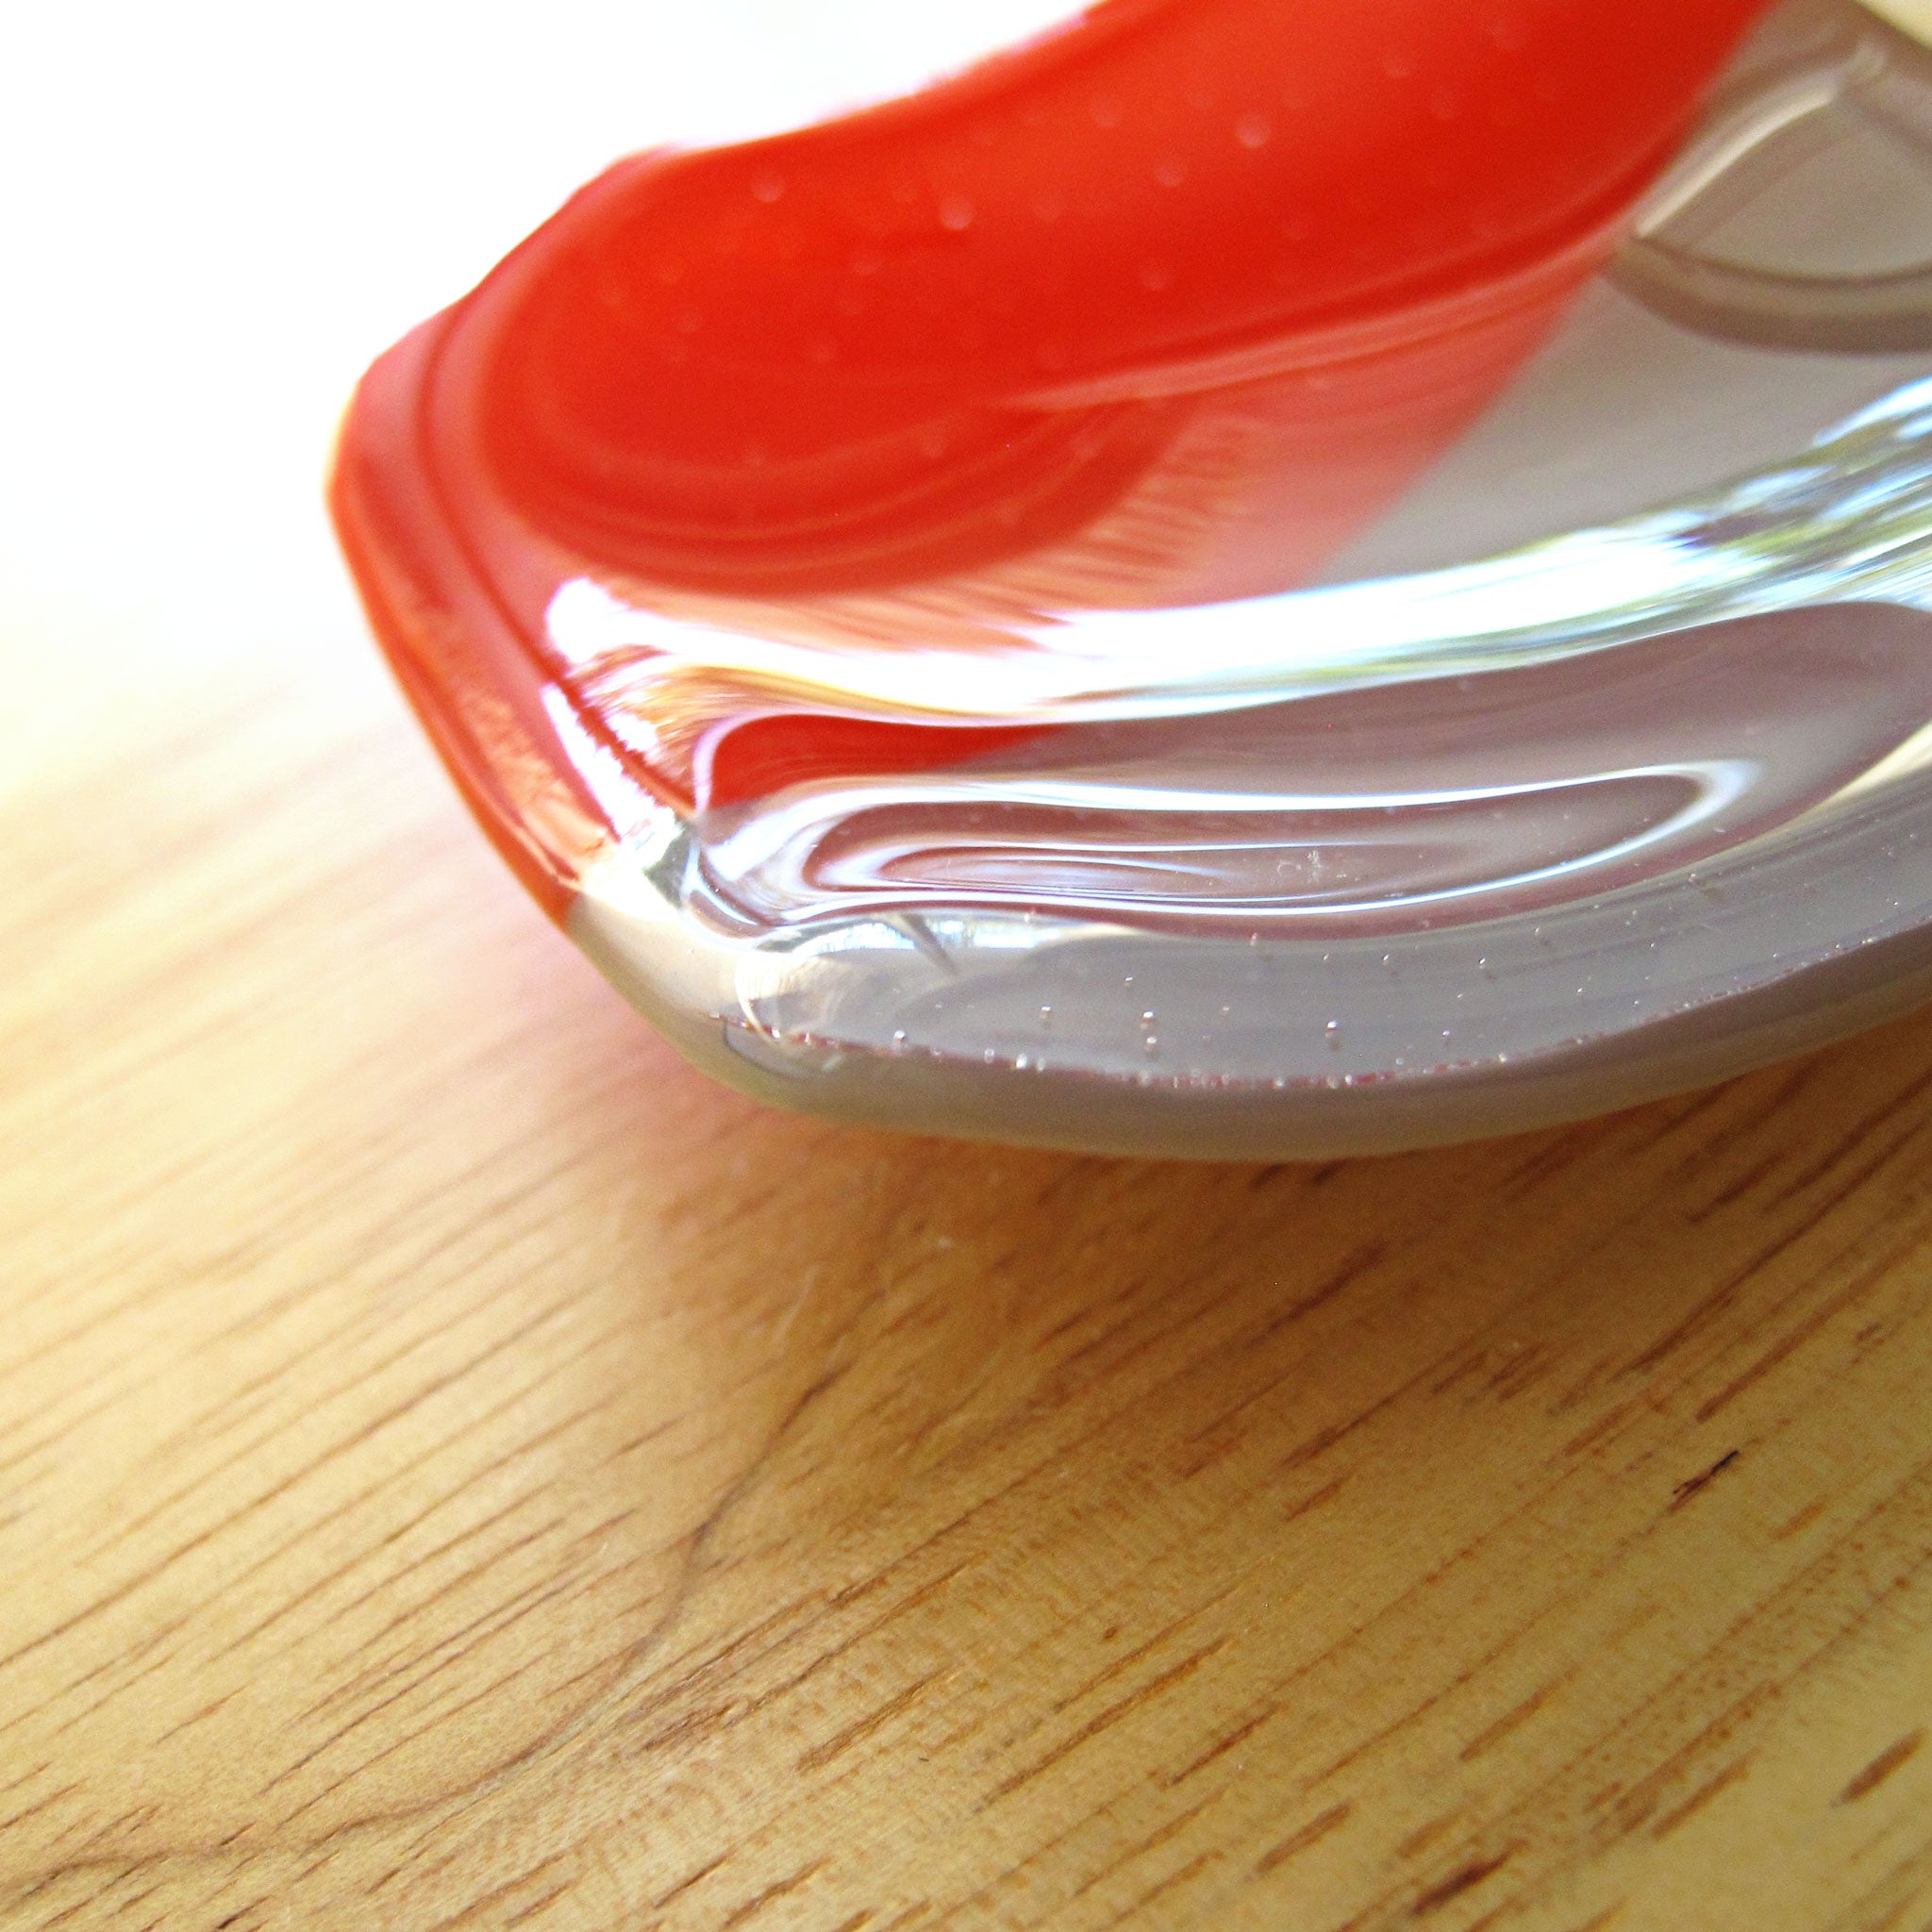 Catchall Ring Dish - Scarlet and Mink